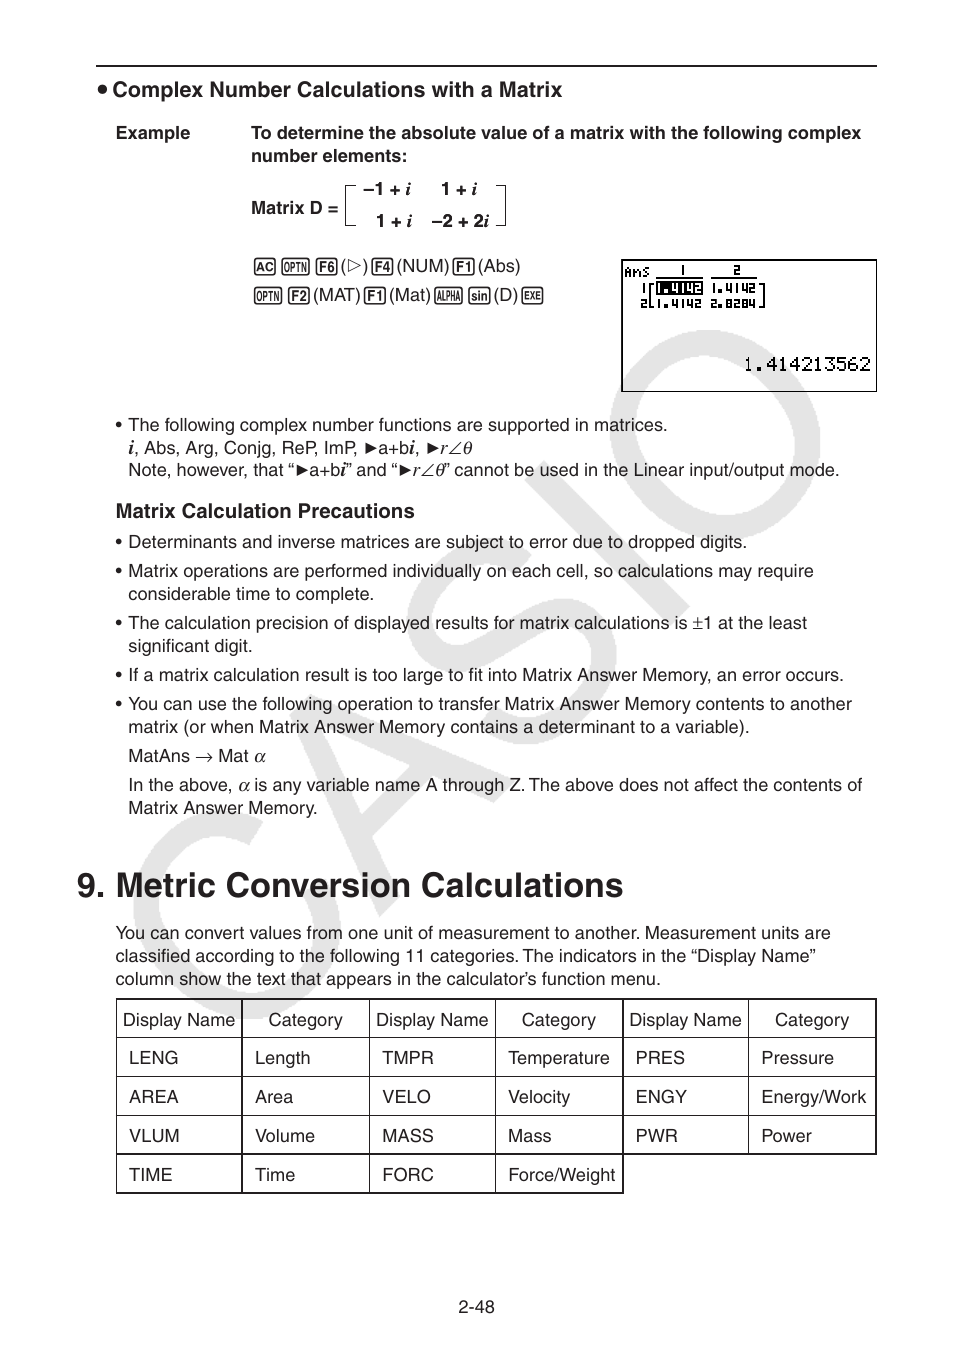 Metric conversion calculations, Mertic conversion calculations -48 | Casio FX-9750GII User Manual | Page 86 / 402